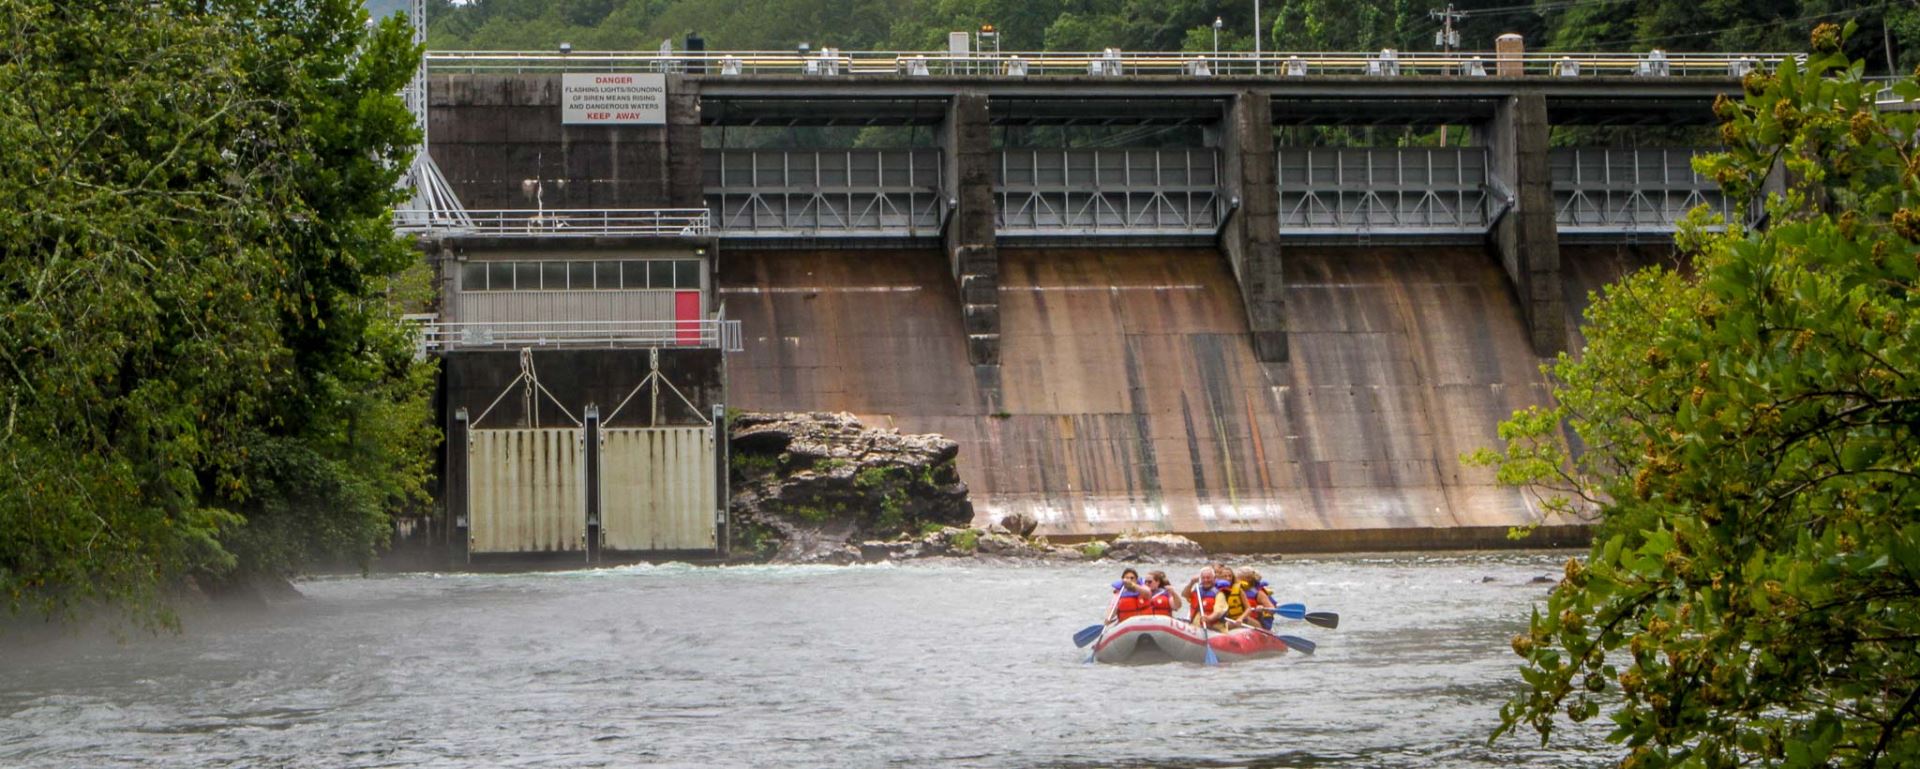 Recreation Releases from TVA Dams